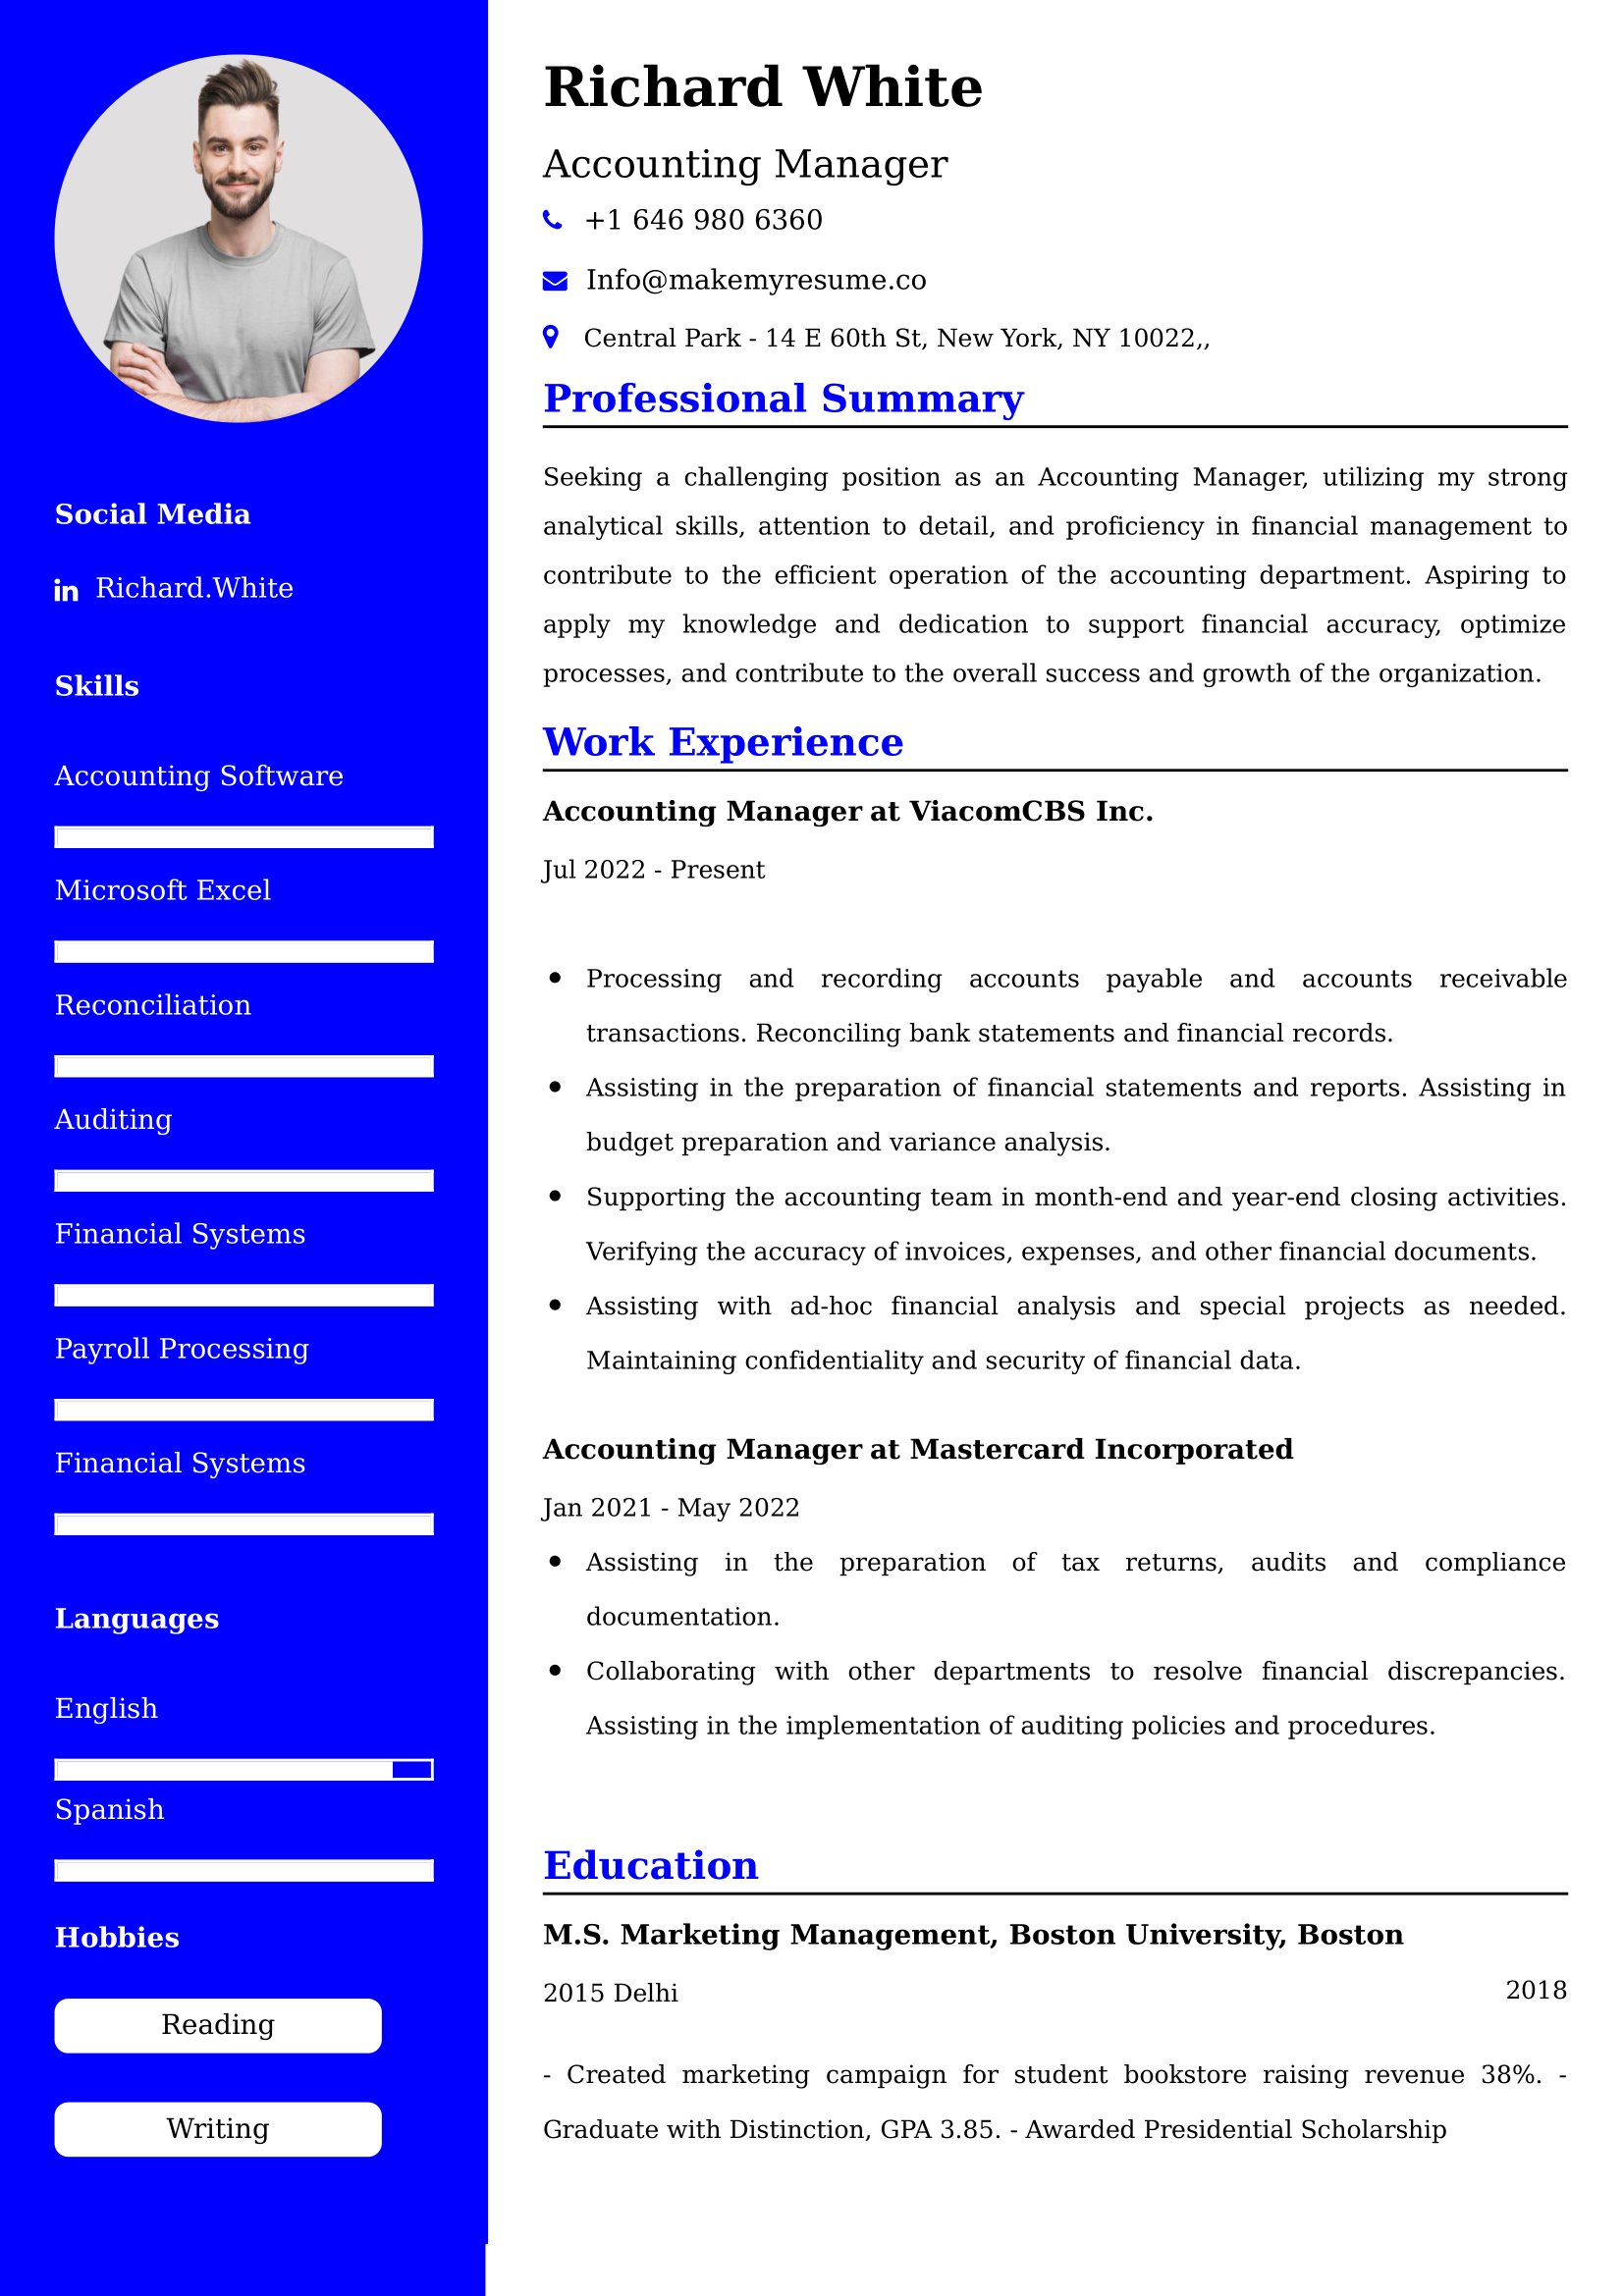 Accounting Manager Resume Examples - Canadian Format and Tips